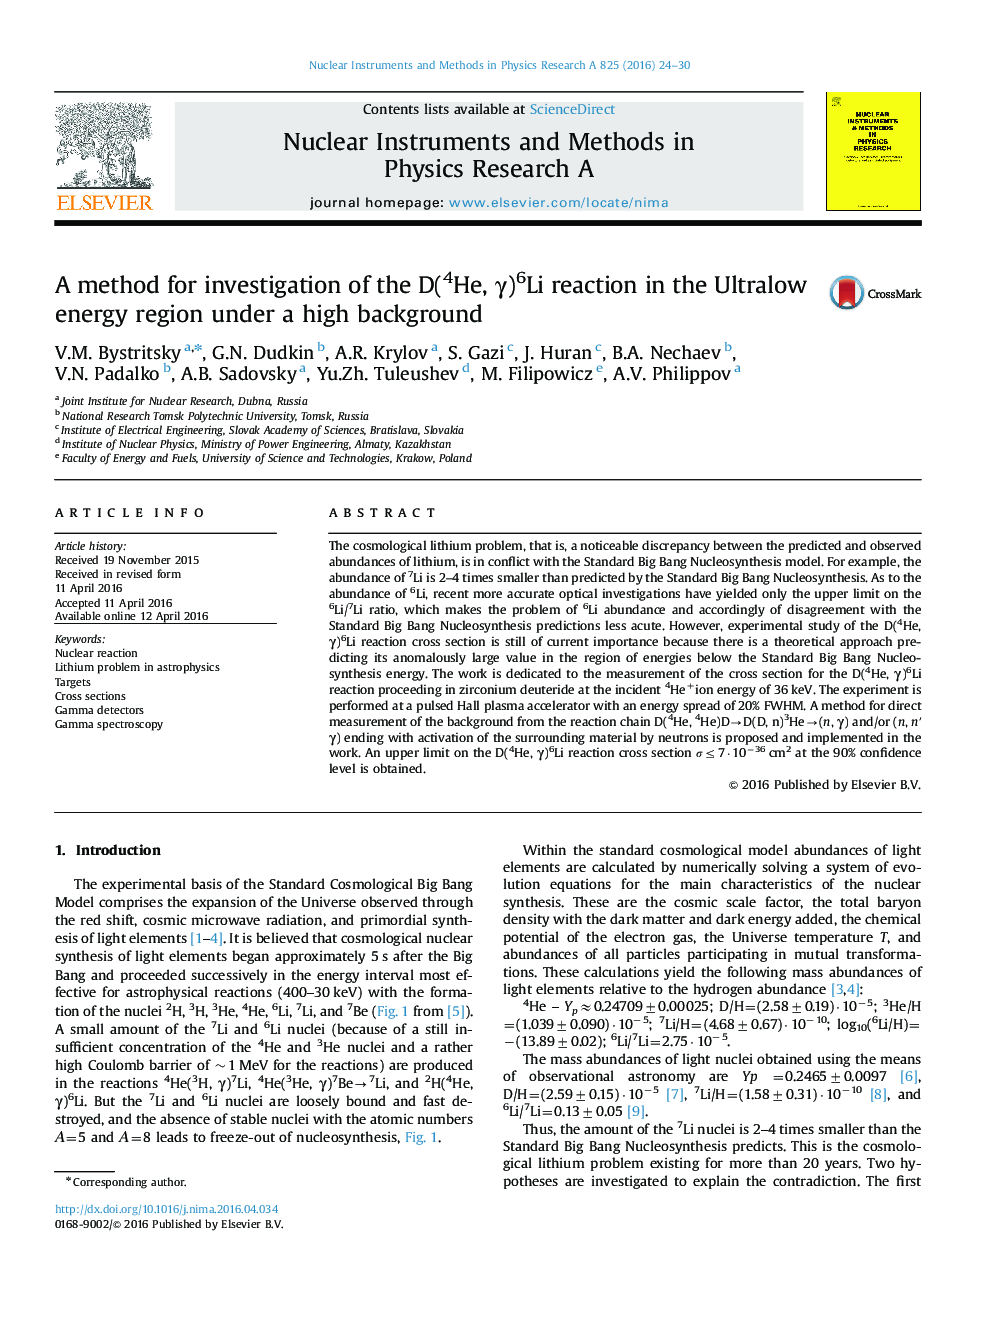 A method for investigation of the D(4He, γ)6Li reaction in the Ultralow energy region under a high background